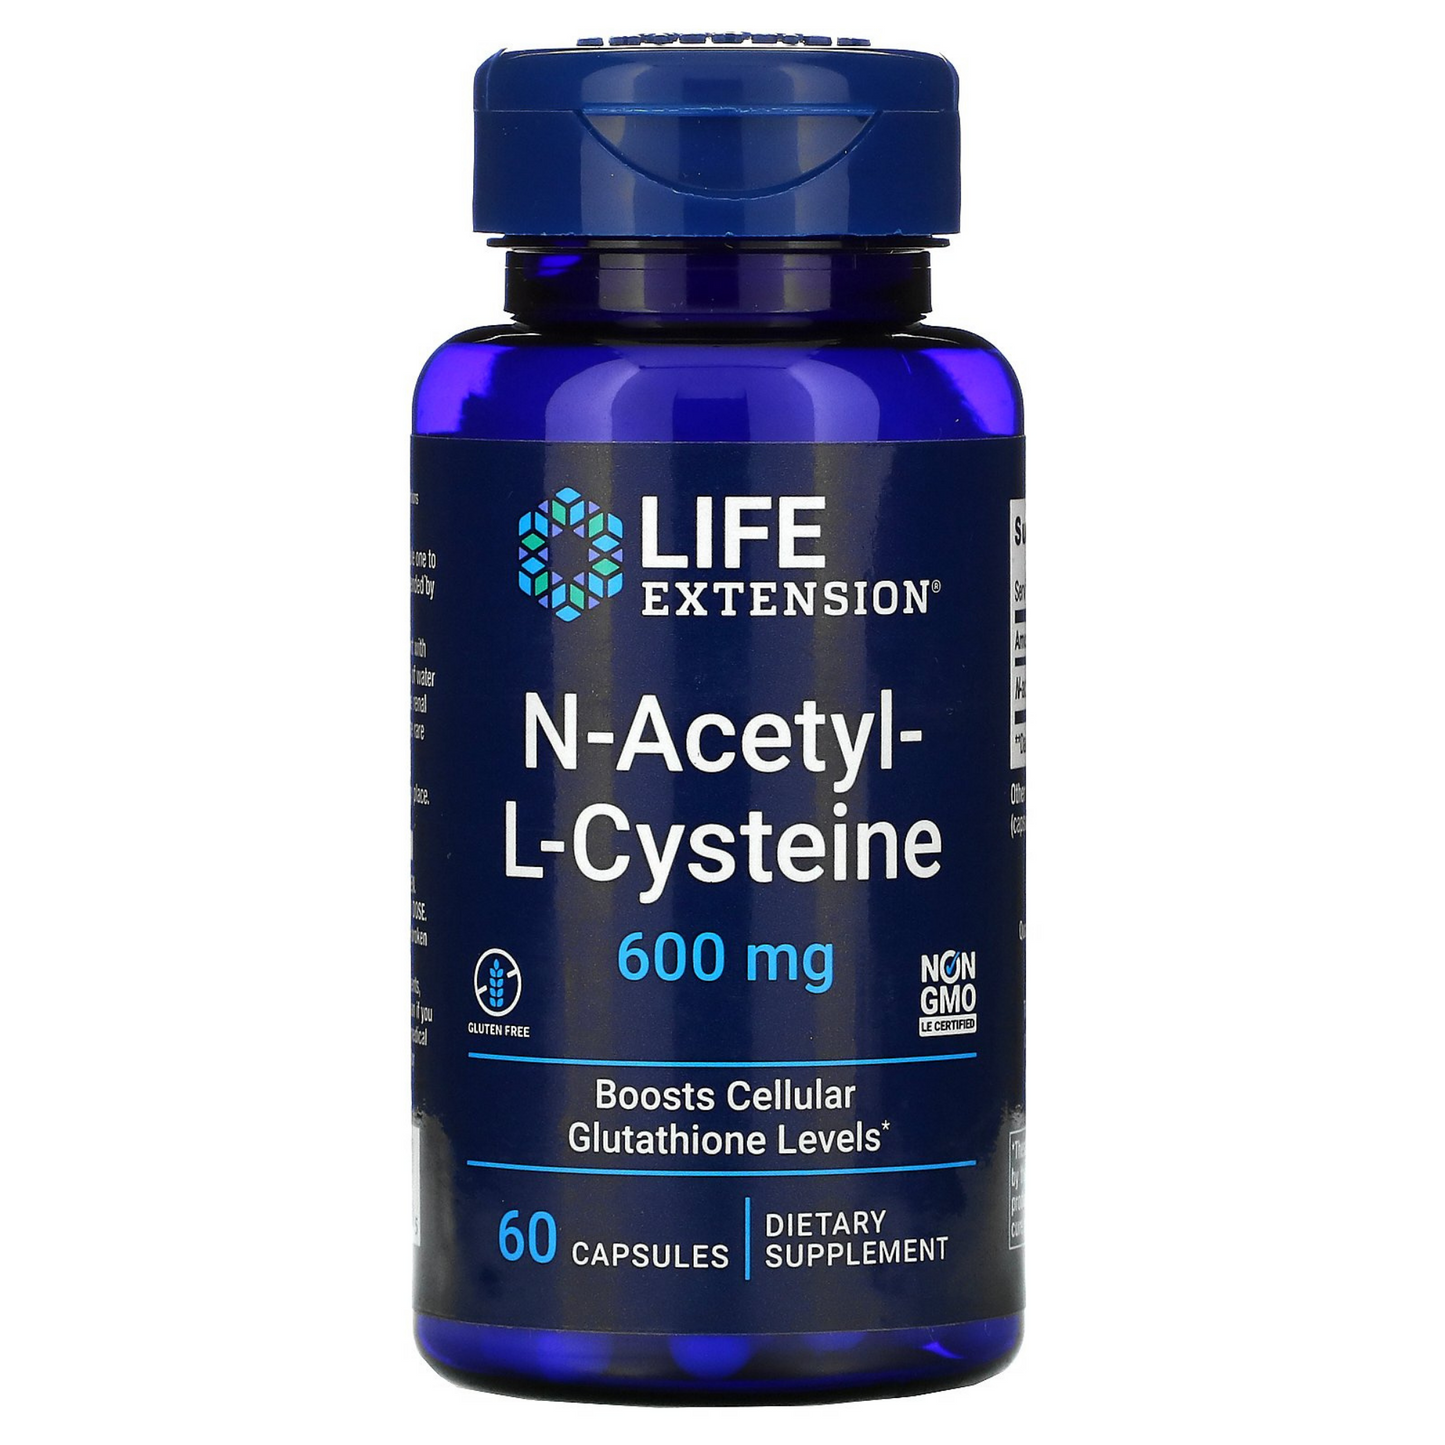 Primary Image of N-Acetyl-L-Cysteine 600mg Capsules